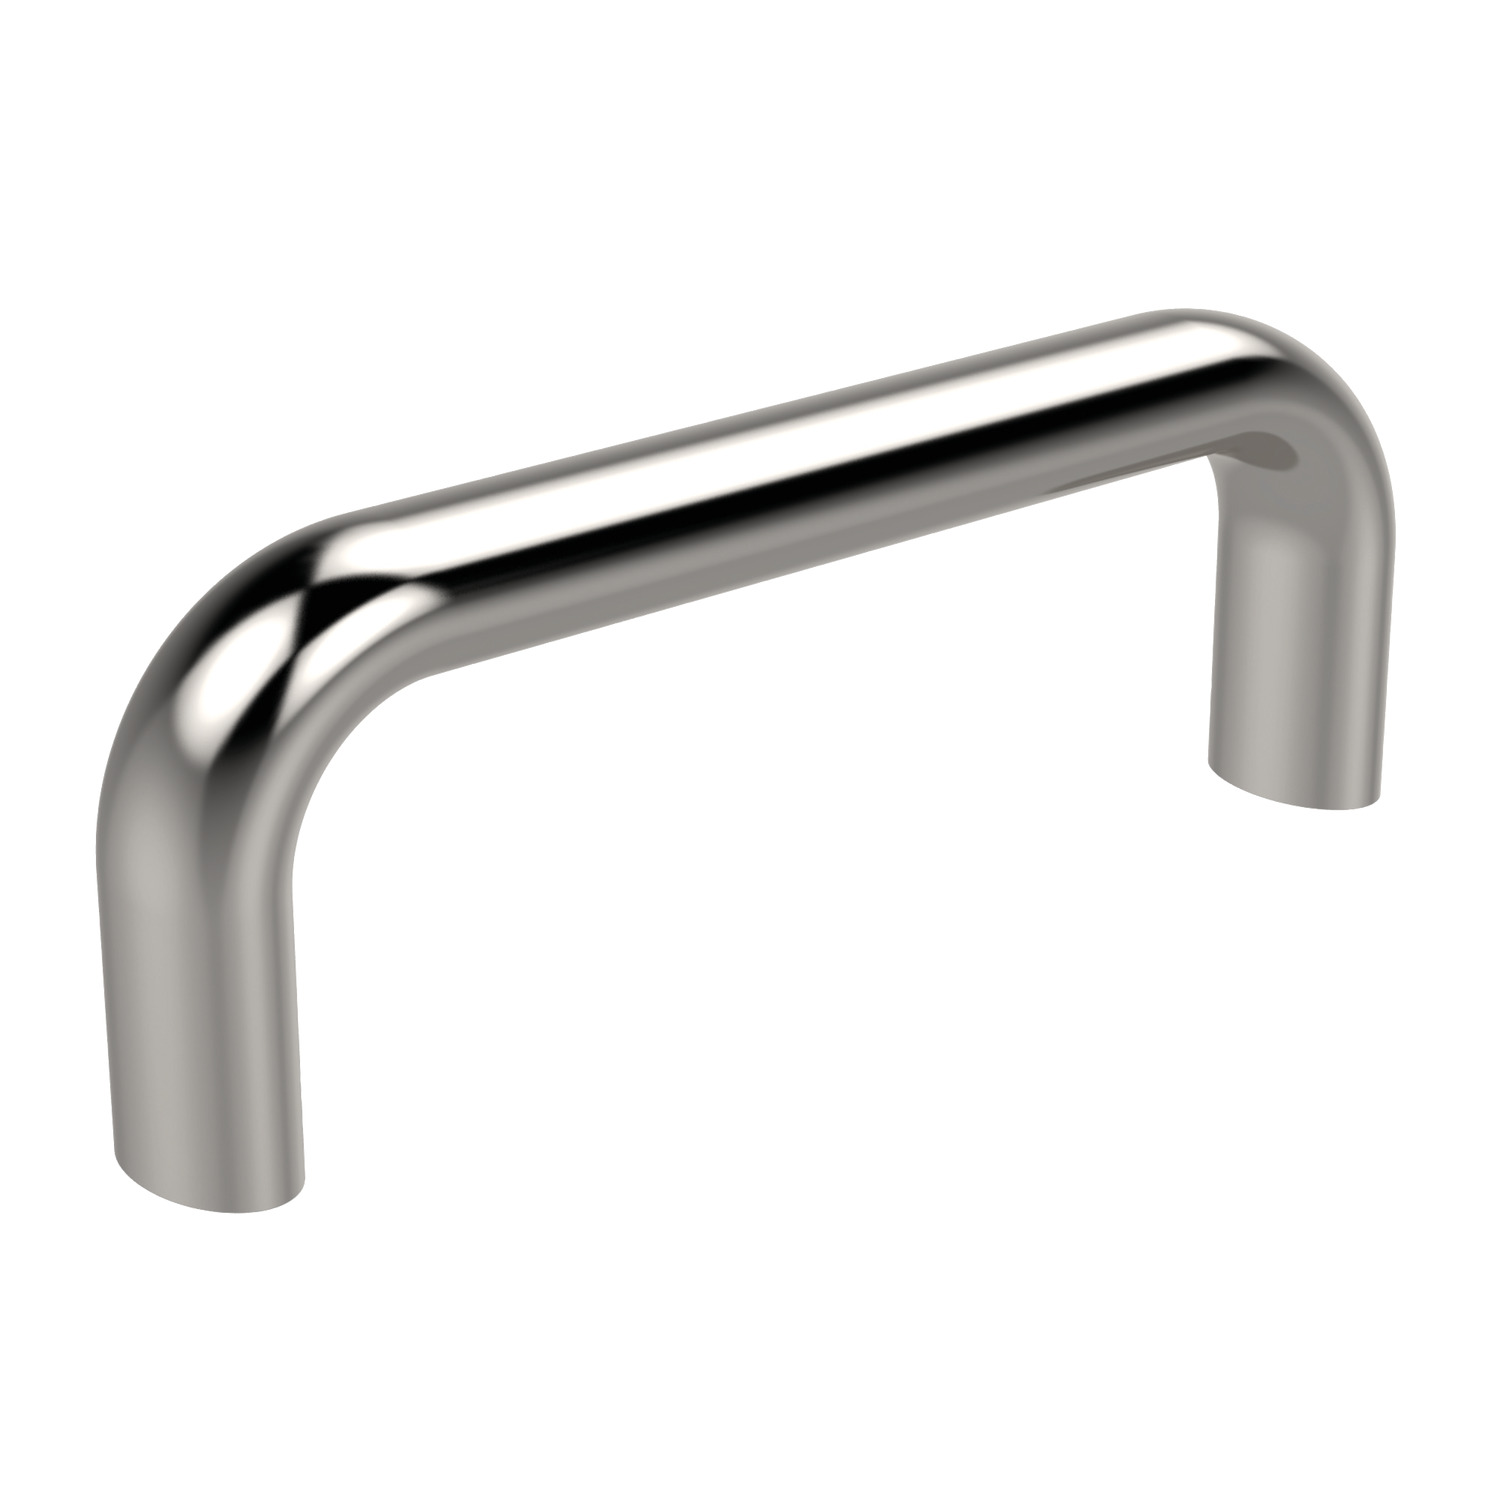 Pull Handles - Oval Type Oval stainless steel pull handles that are rear mounting offering an ergonomic design with a smooth finish.